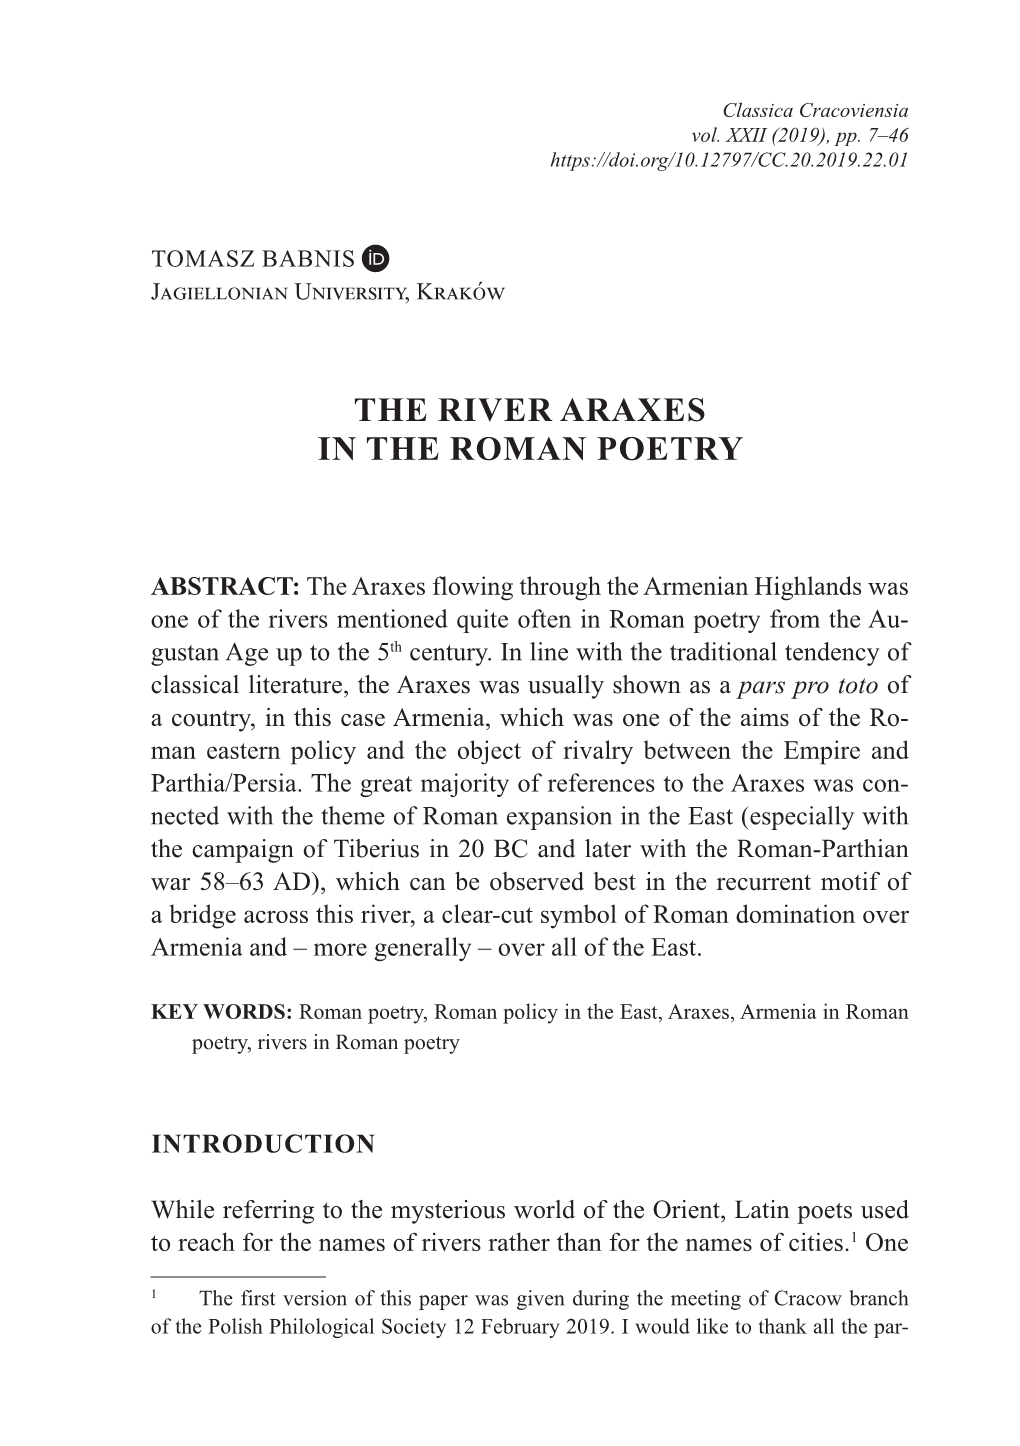 The River Araxes in the Roman Poetry